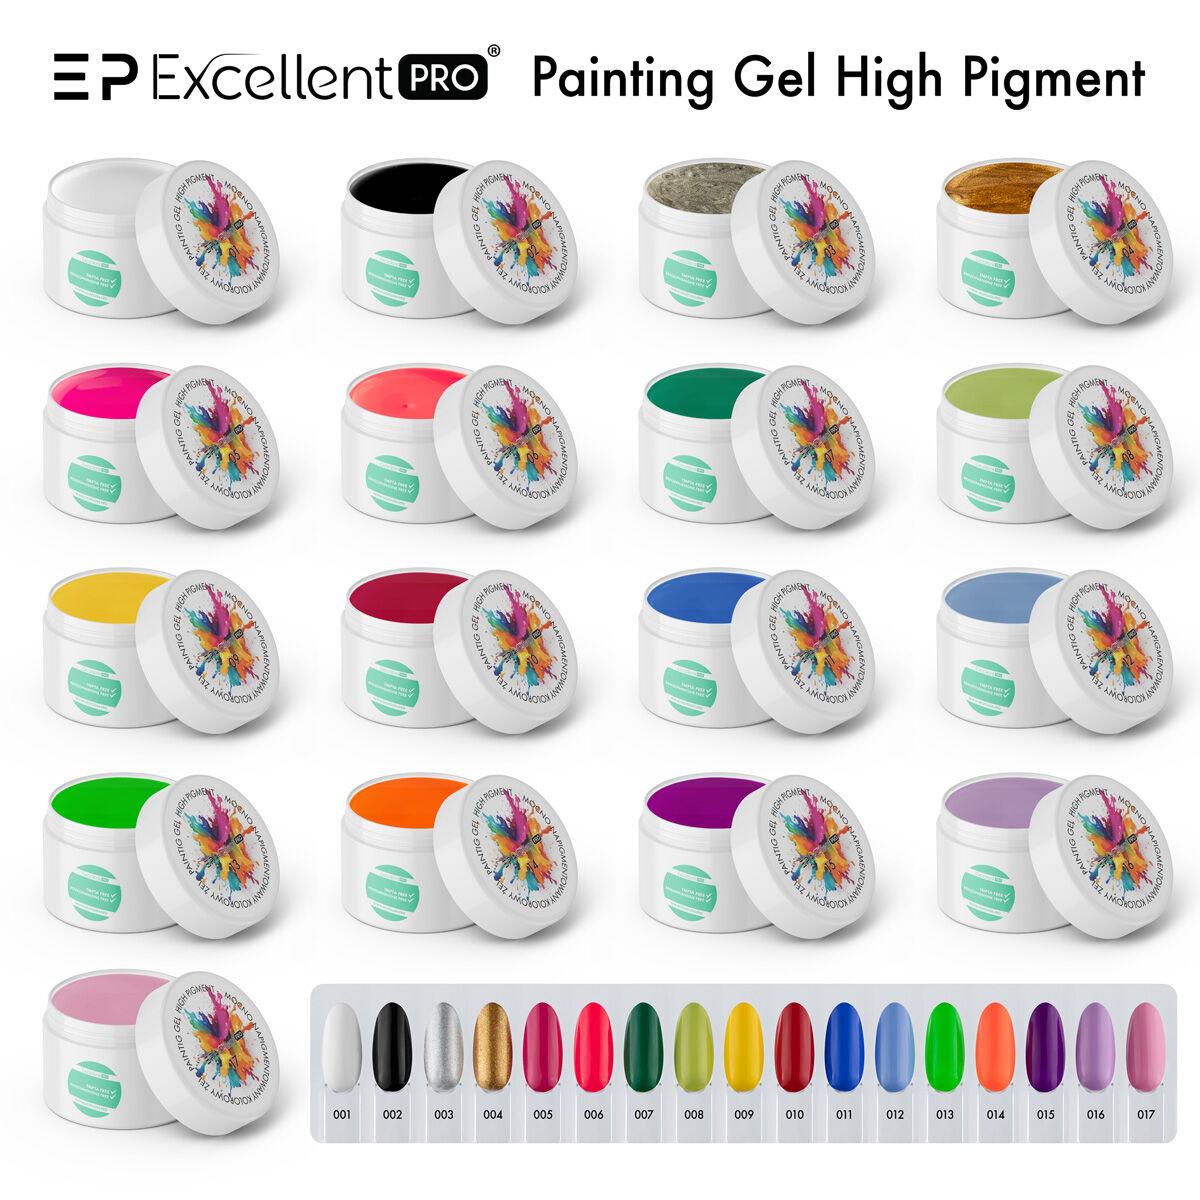 Painting Gel High Pigment